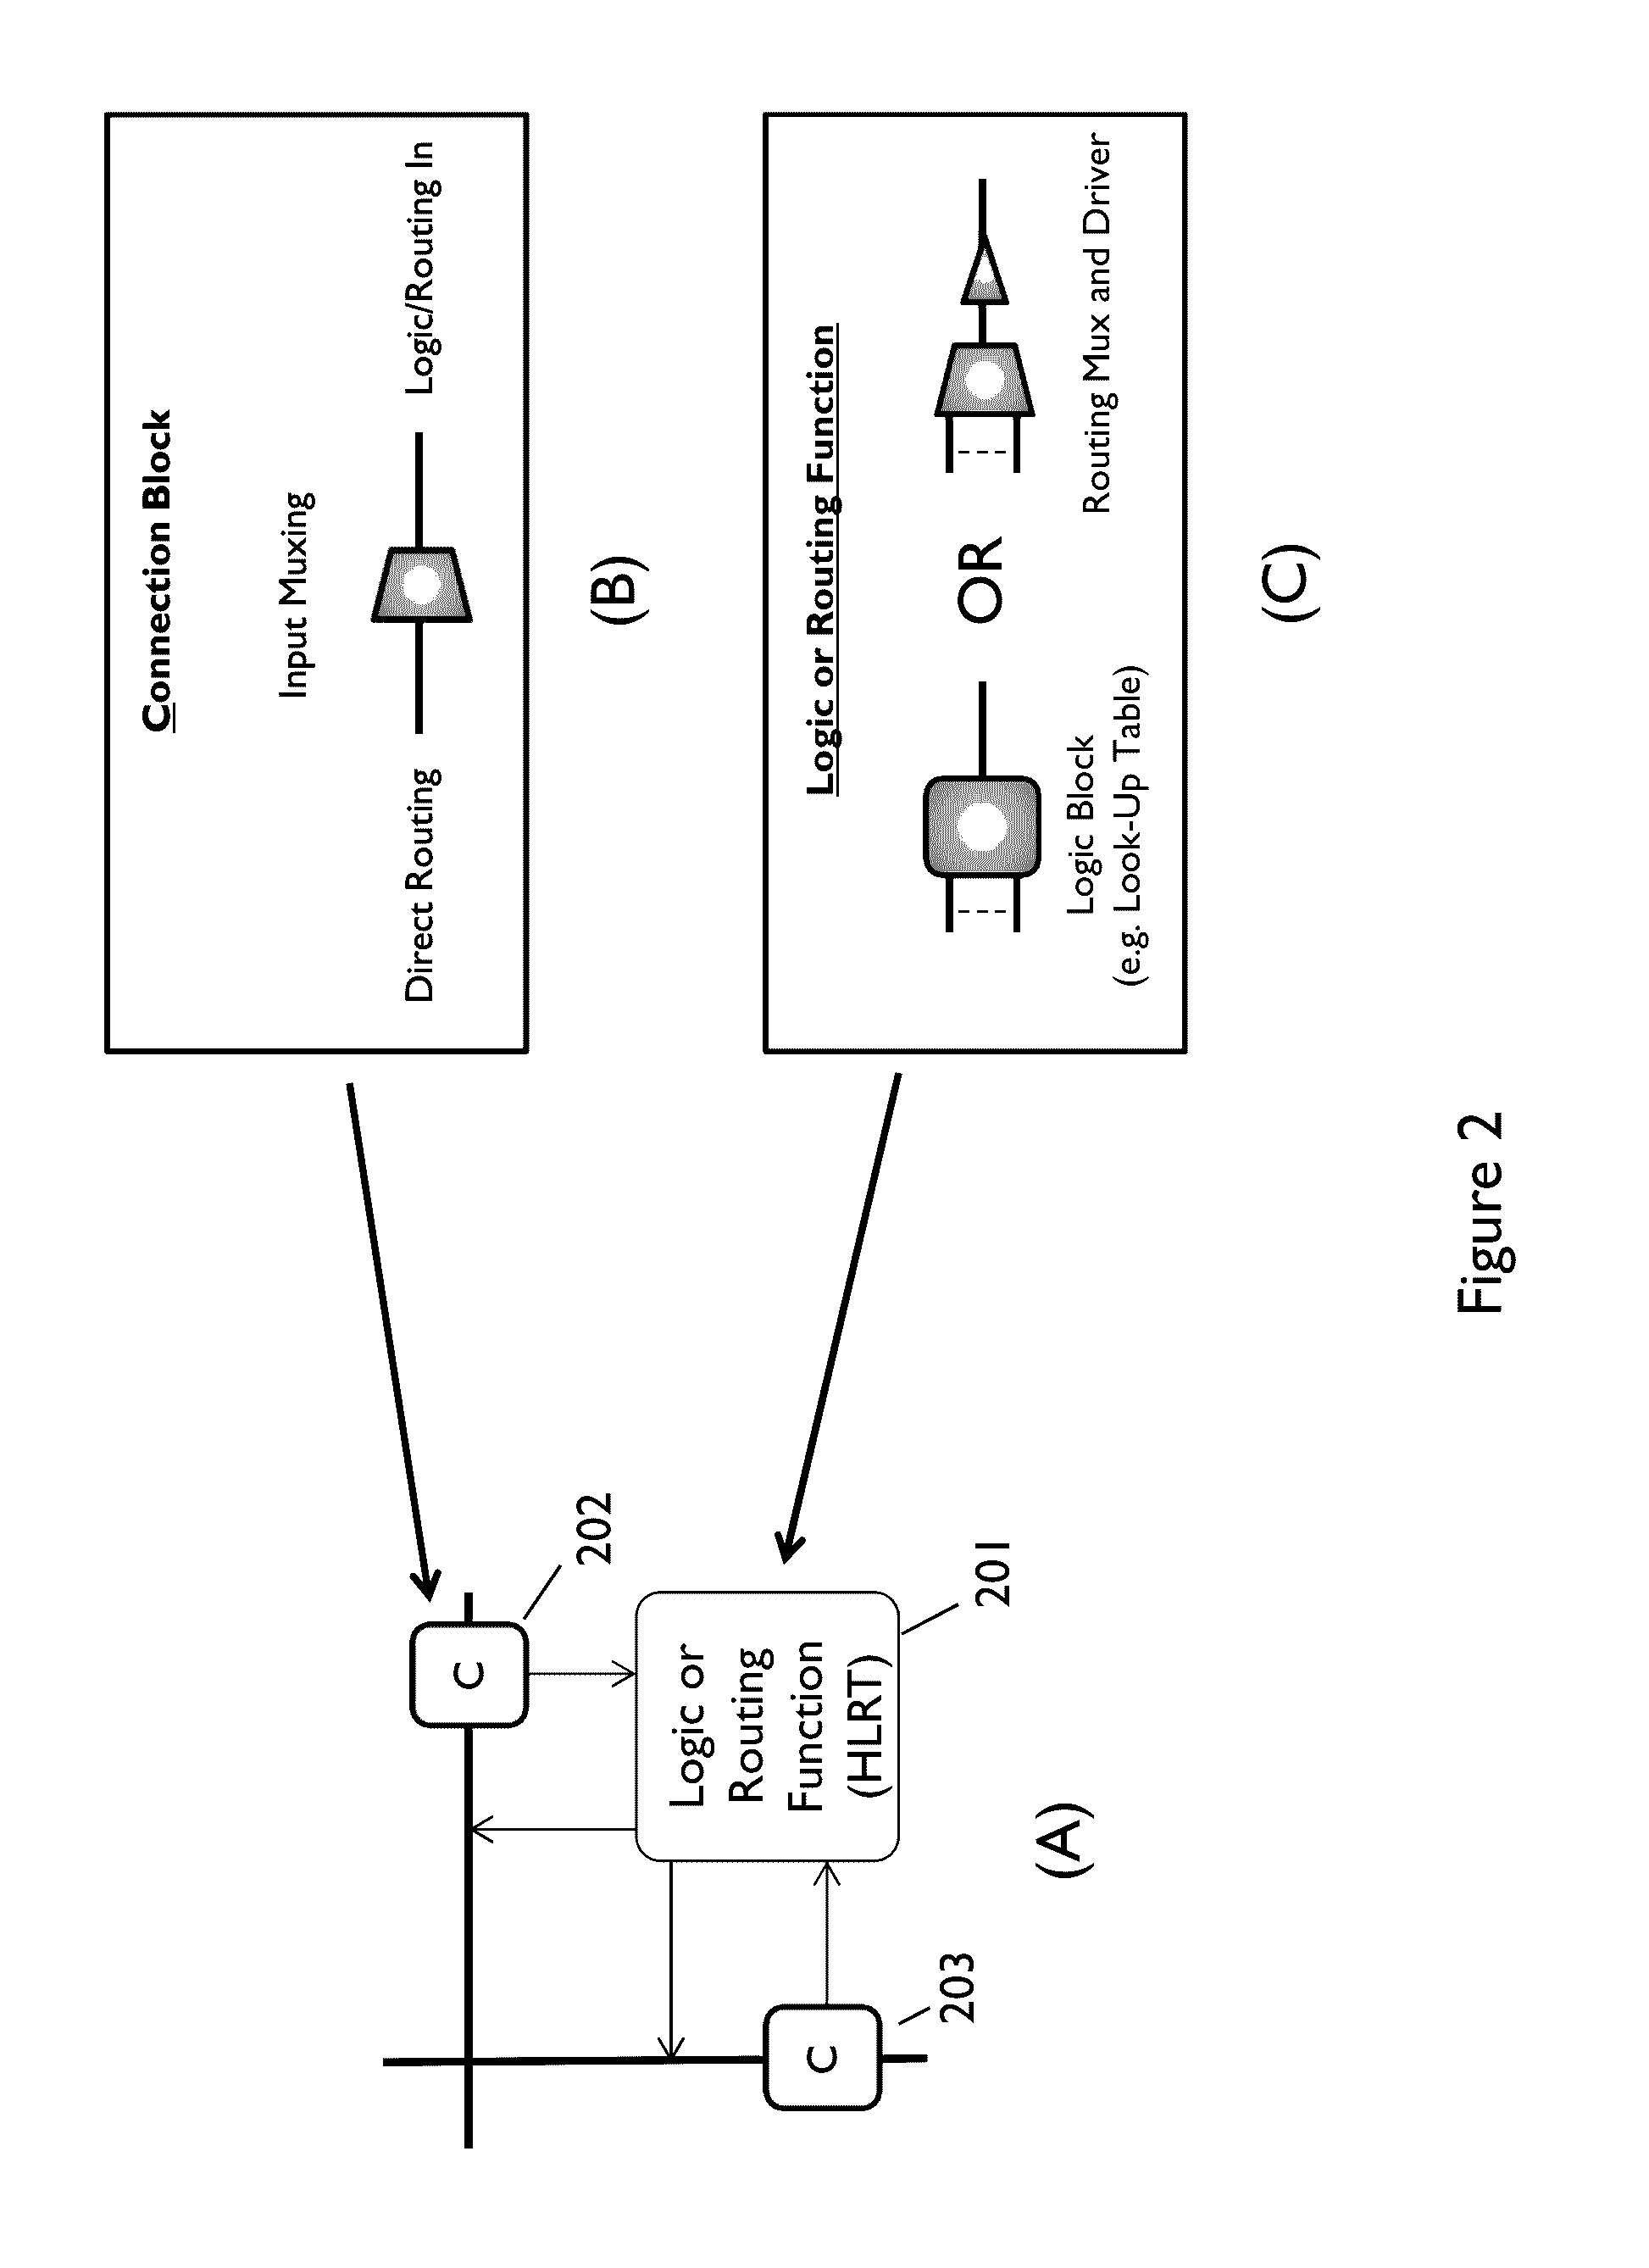 Fine grain programmable gate architecture with hybrid logic/routing element and direct-drive routing